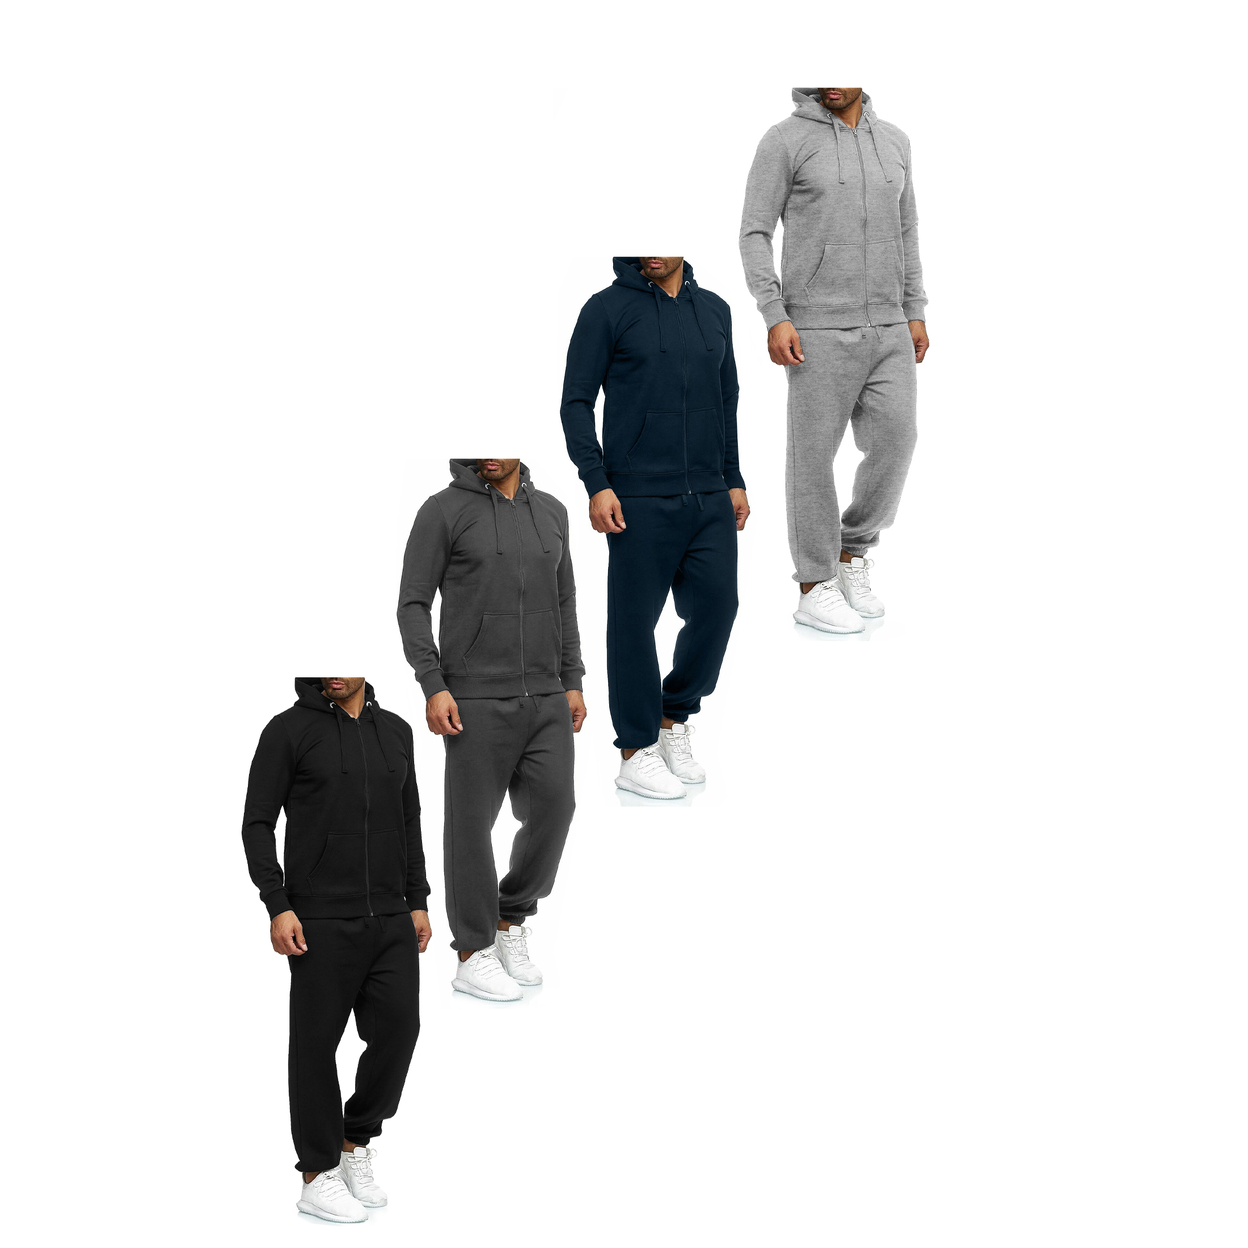 Multi-Pack: Men's Casual Big & Tall Athletic Active Winter Warm Fleece Lined Full Zip Tracksuit Jogger Set - Charcoal, 1-pack, X-large